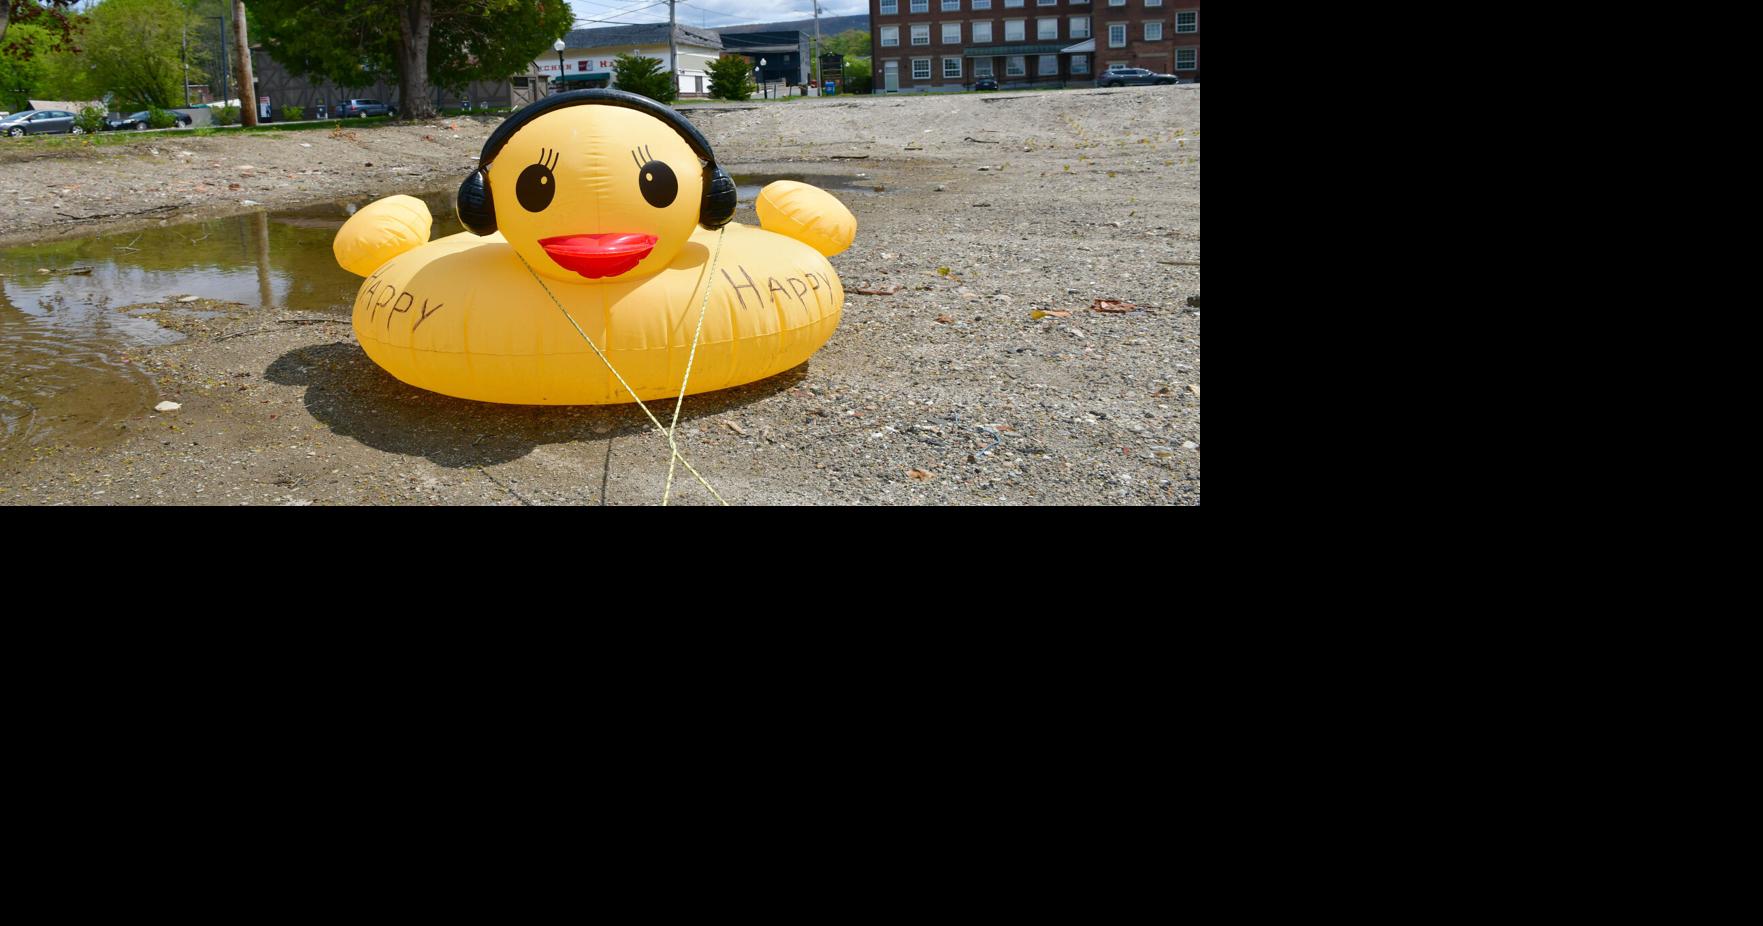 giant rubber duck for pool